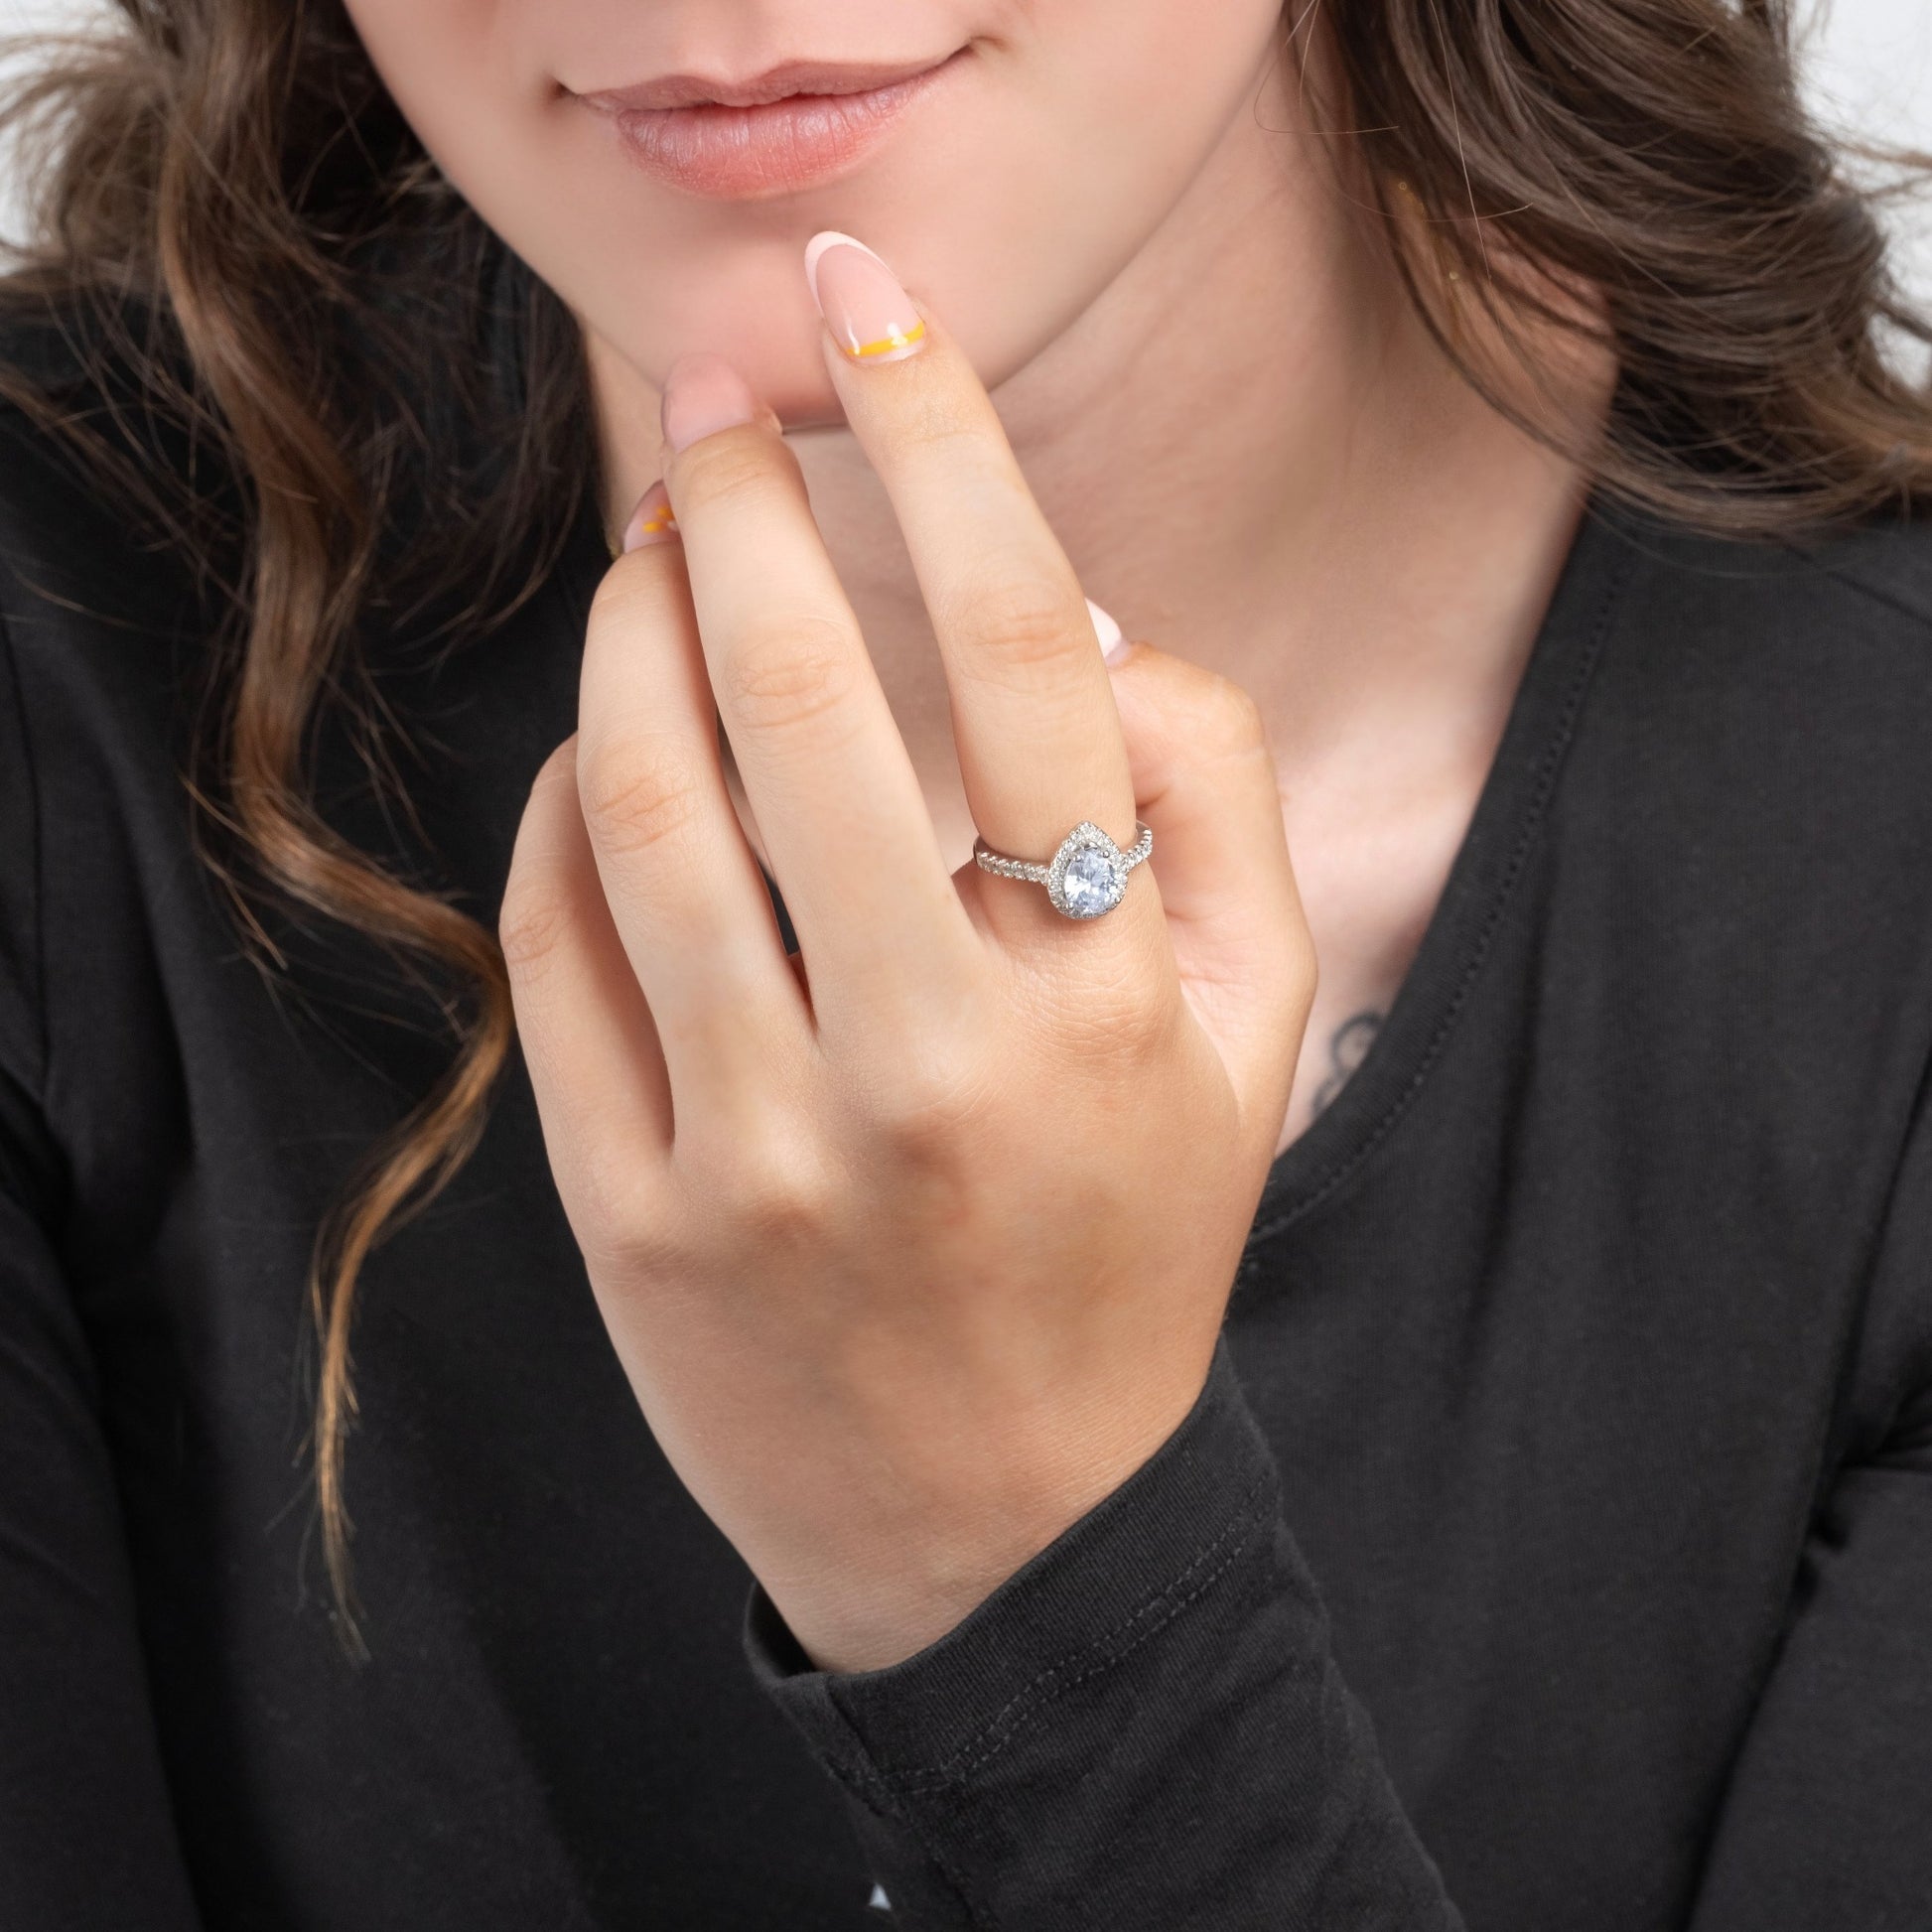 Model wearing Diamond Candy Silver Ring on her finger.